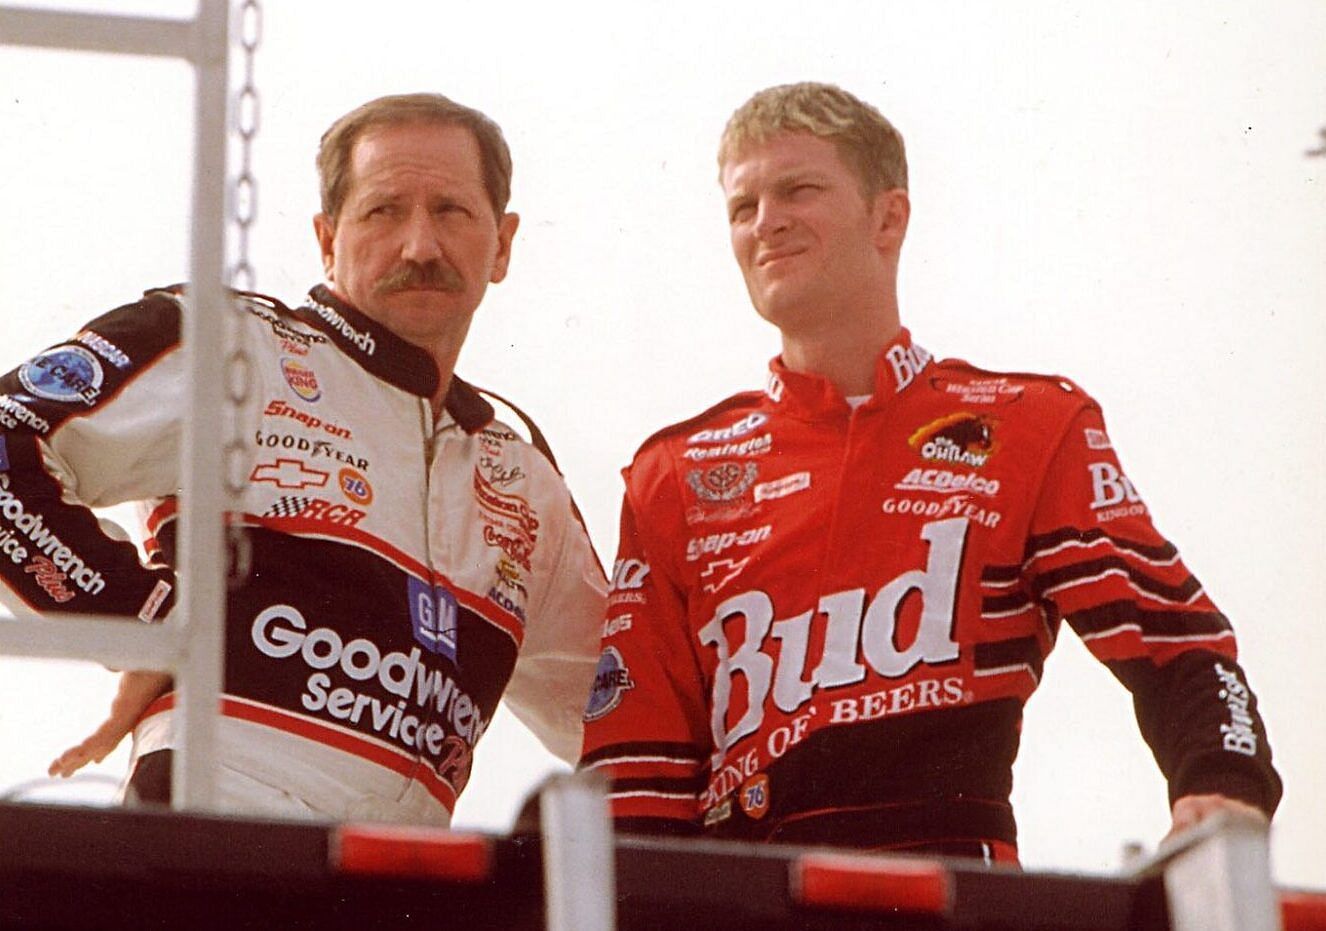 (L-R) NASCAR Cup Series drivers Dale Earnhardt Sr. and his son Dale Earnhardt Jr. Picture Credits: whiskeyriff.com/ISC Archives/CQ-Roll Call Group via Getty Images